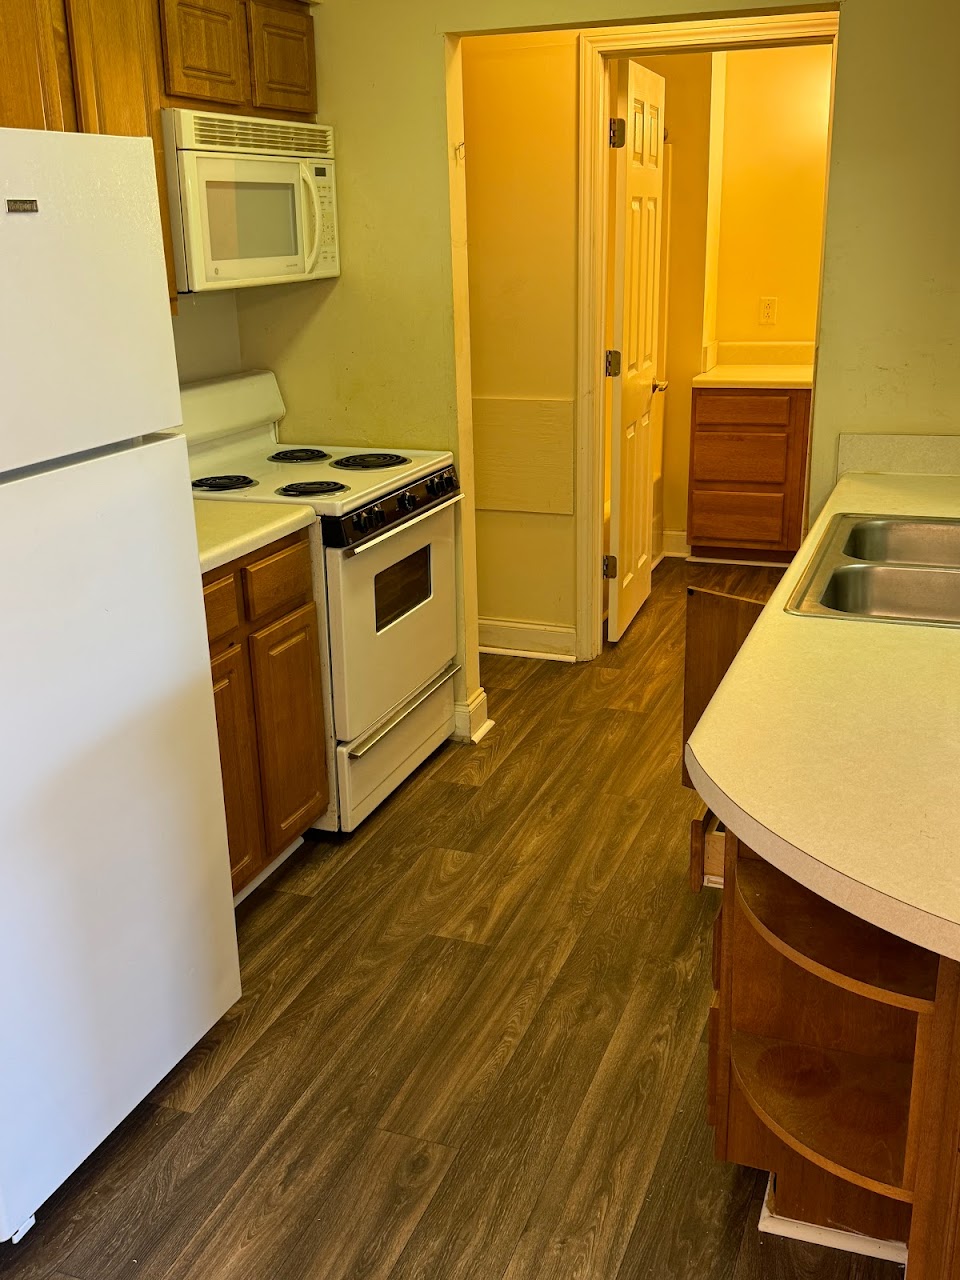 Photo of LAUREL OAKS APTS. Affordable housing located at 667 RUTHERFORD RD GREENVILLE, SC 29609